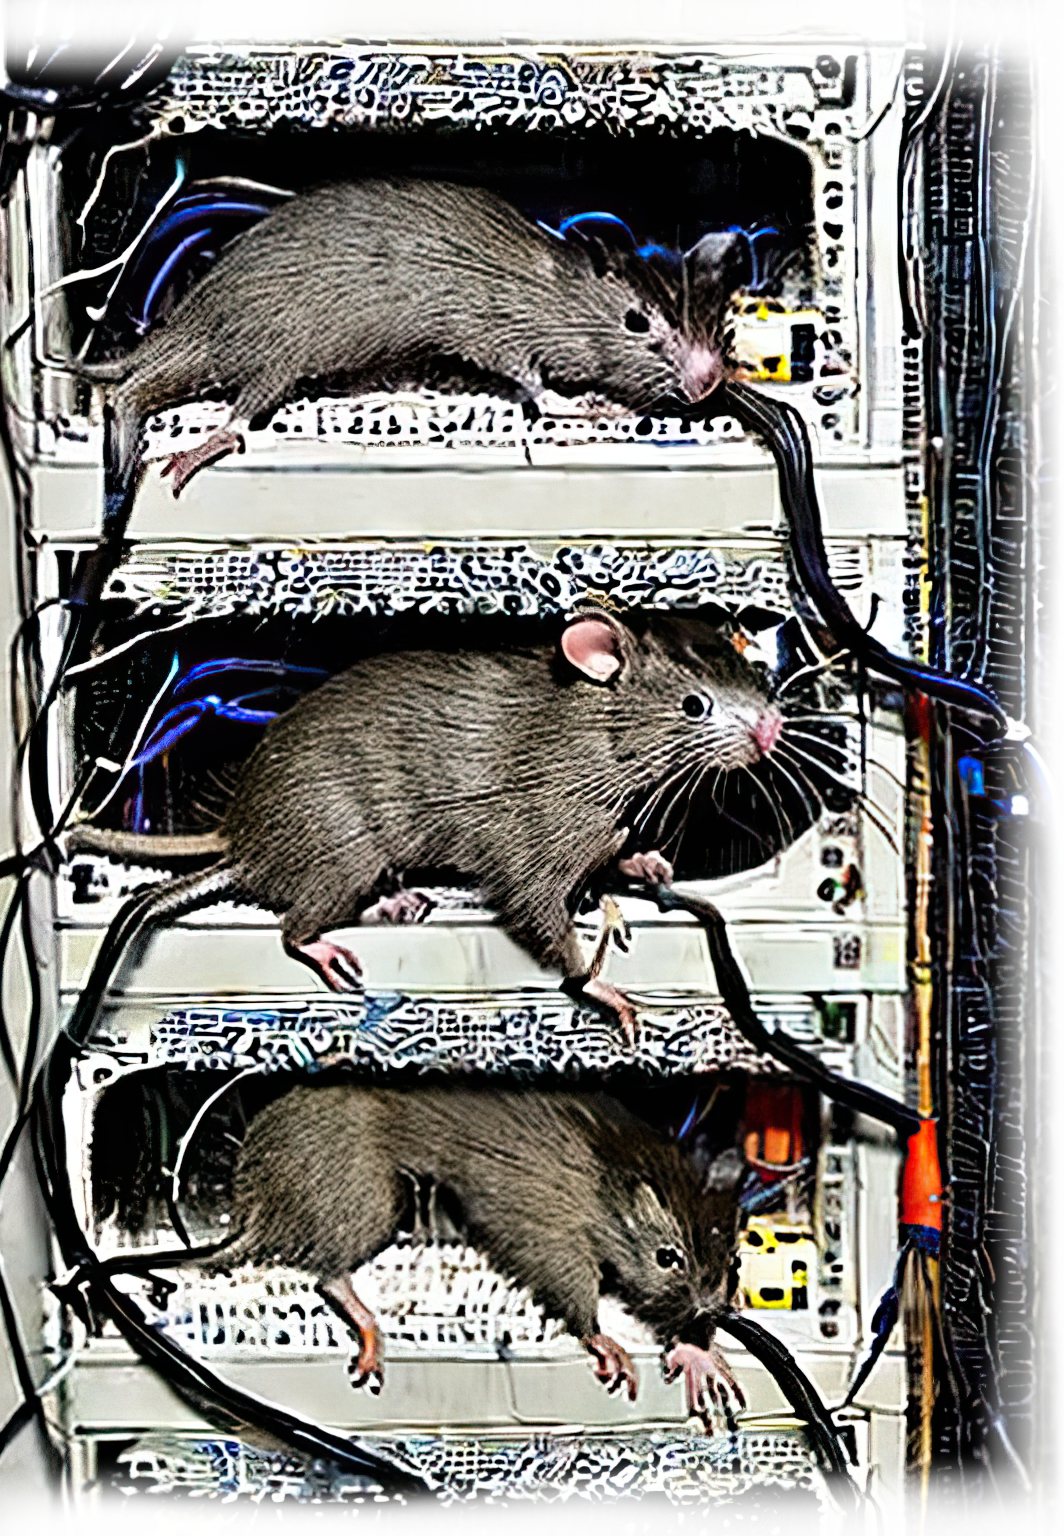 AI image prompt: internet server room swarming with rats